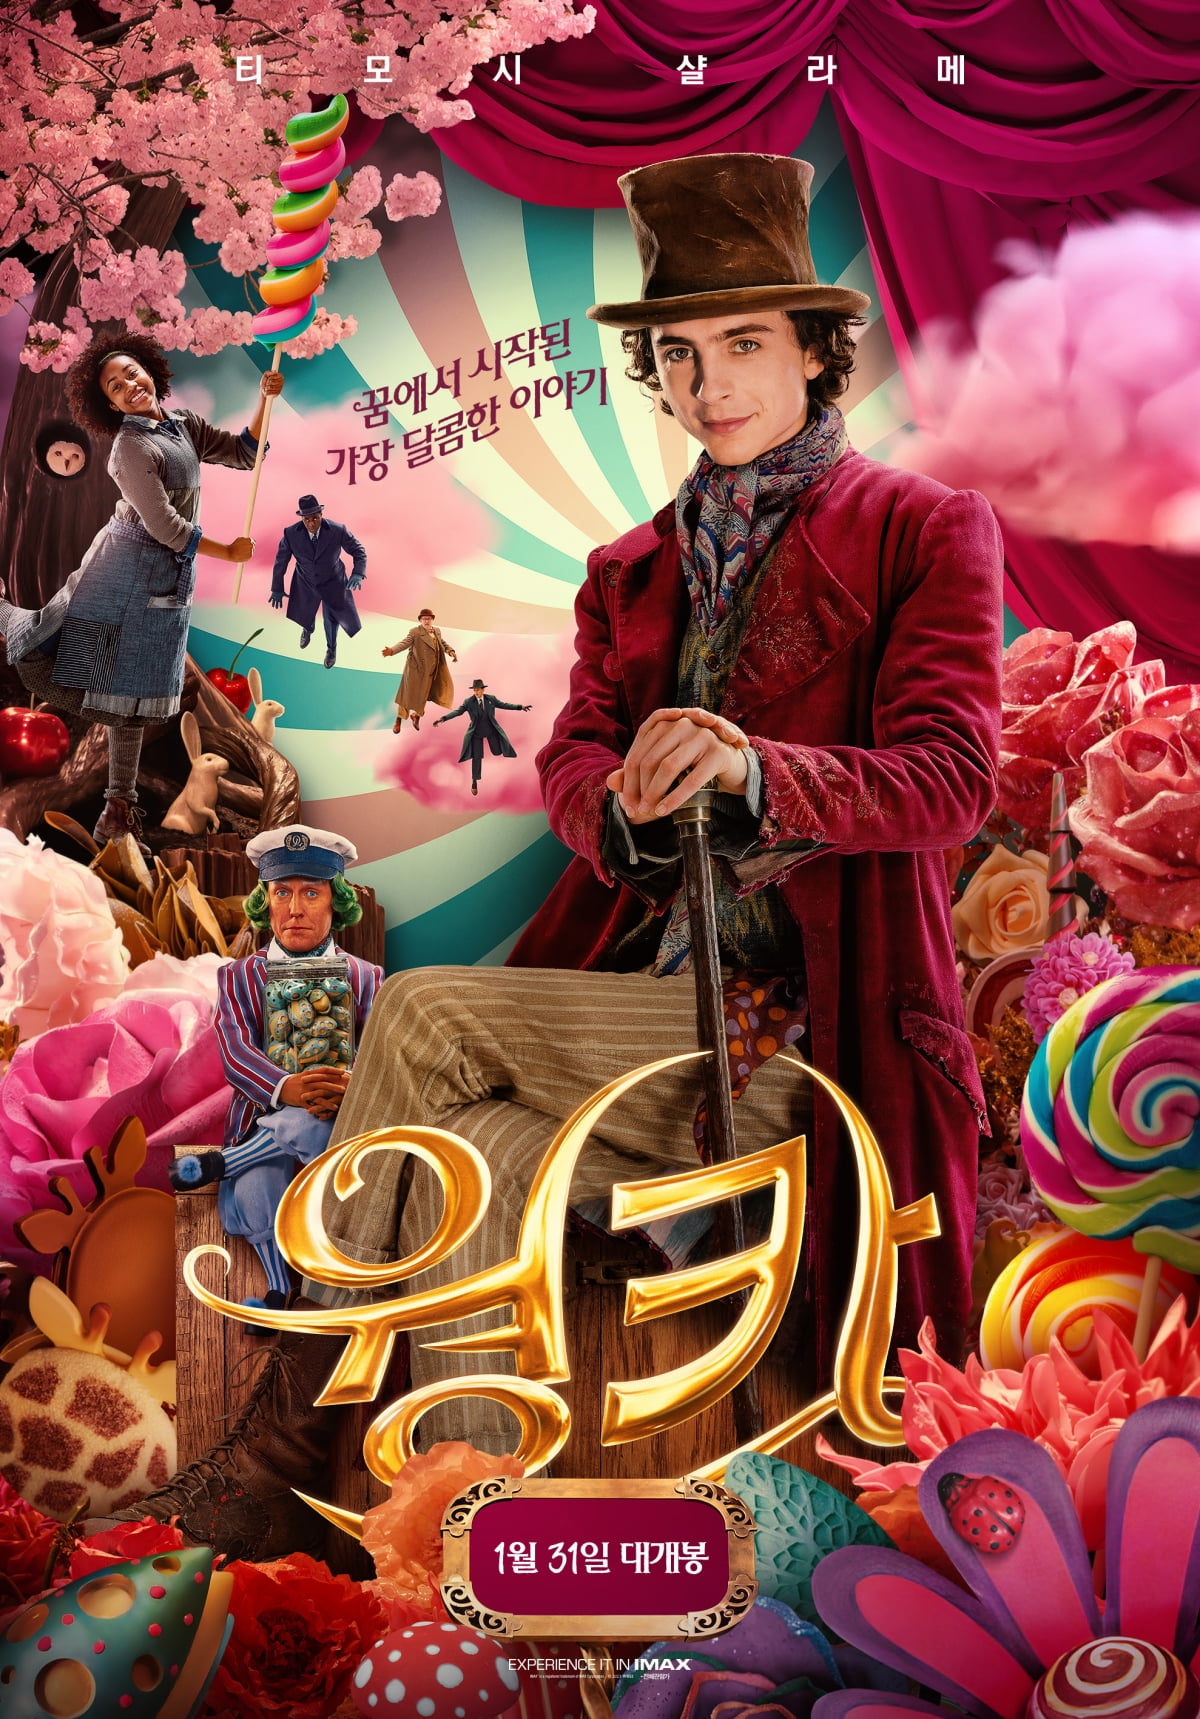 “The sweetest story that started in a dream” The journey of Timothee Chalamet in the movie ‘Wonka’